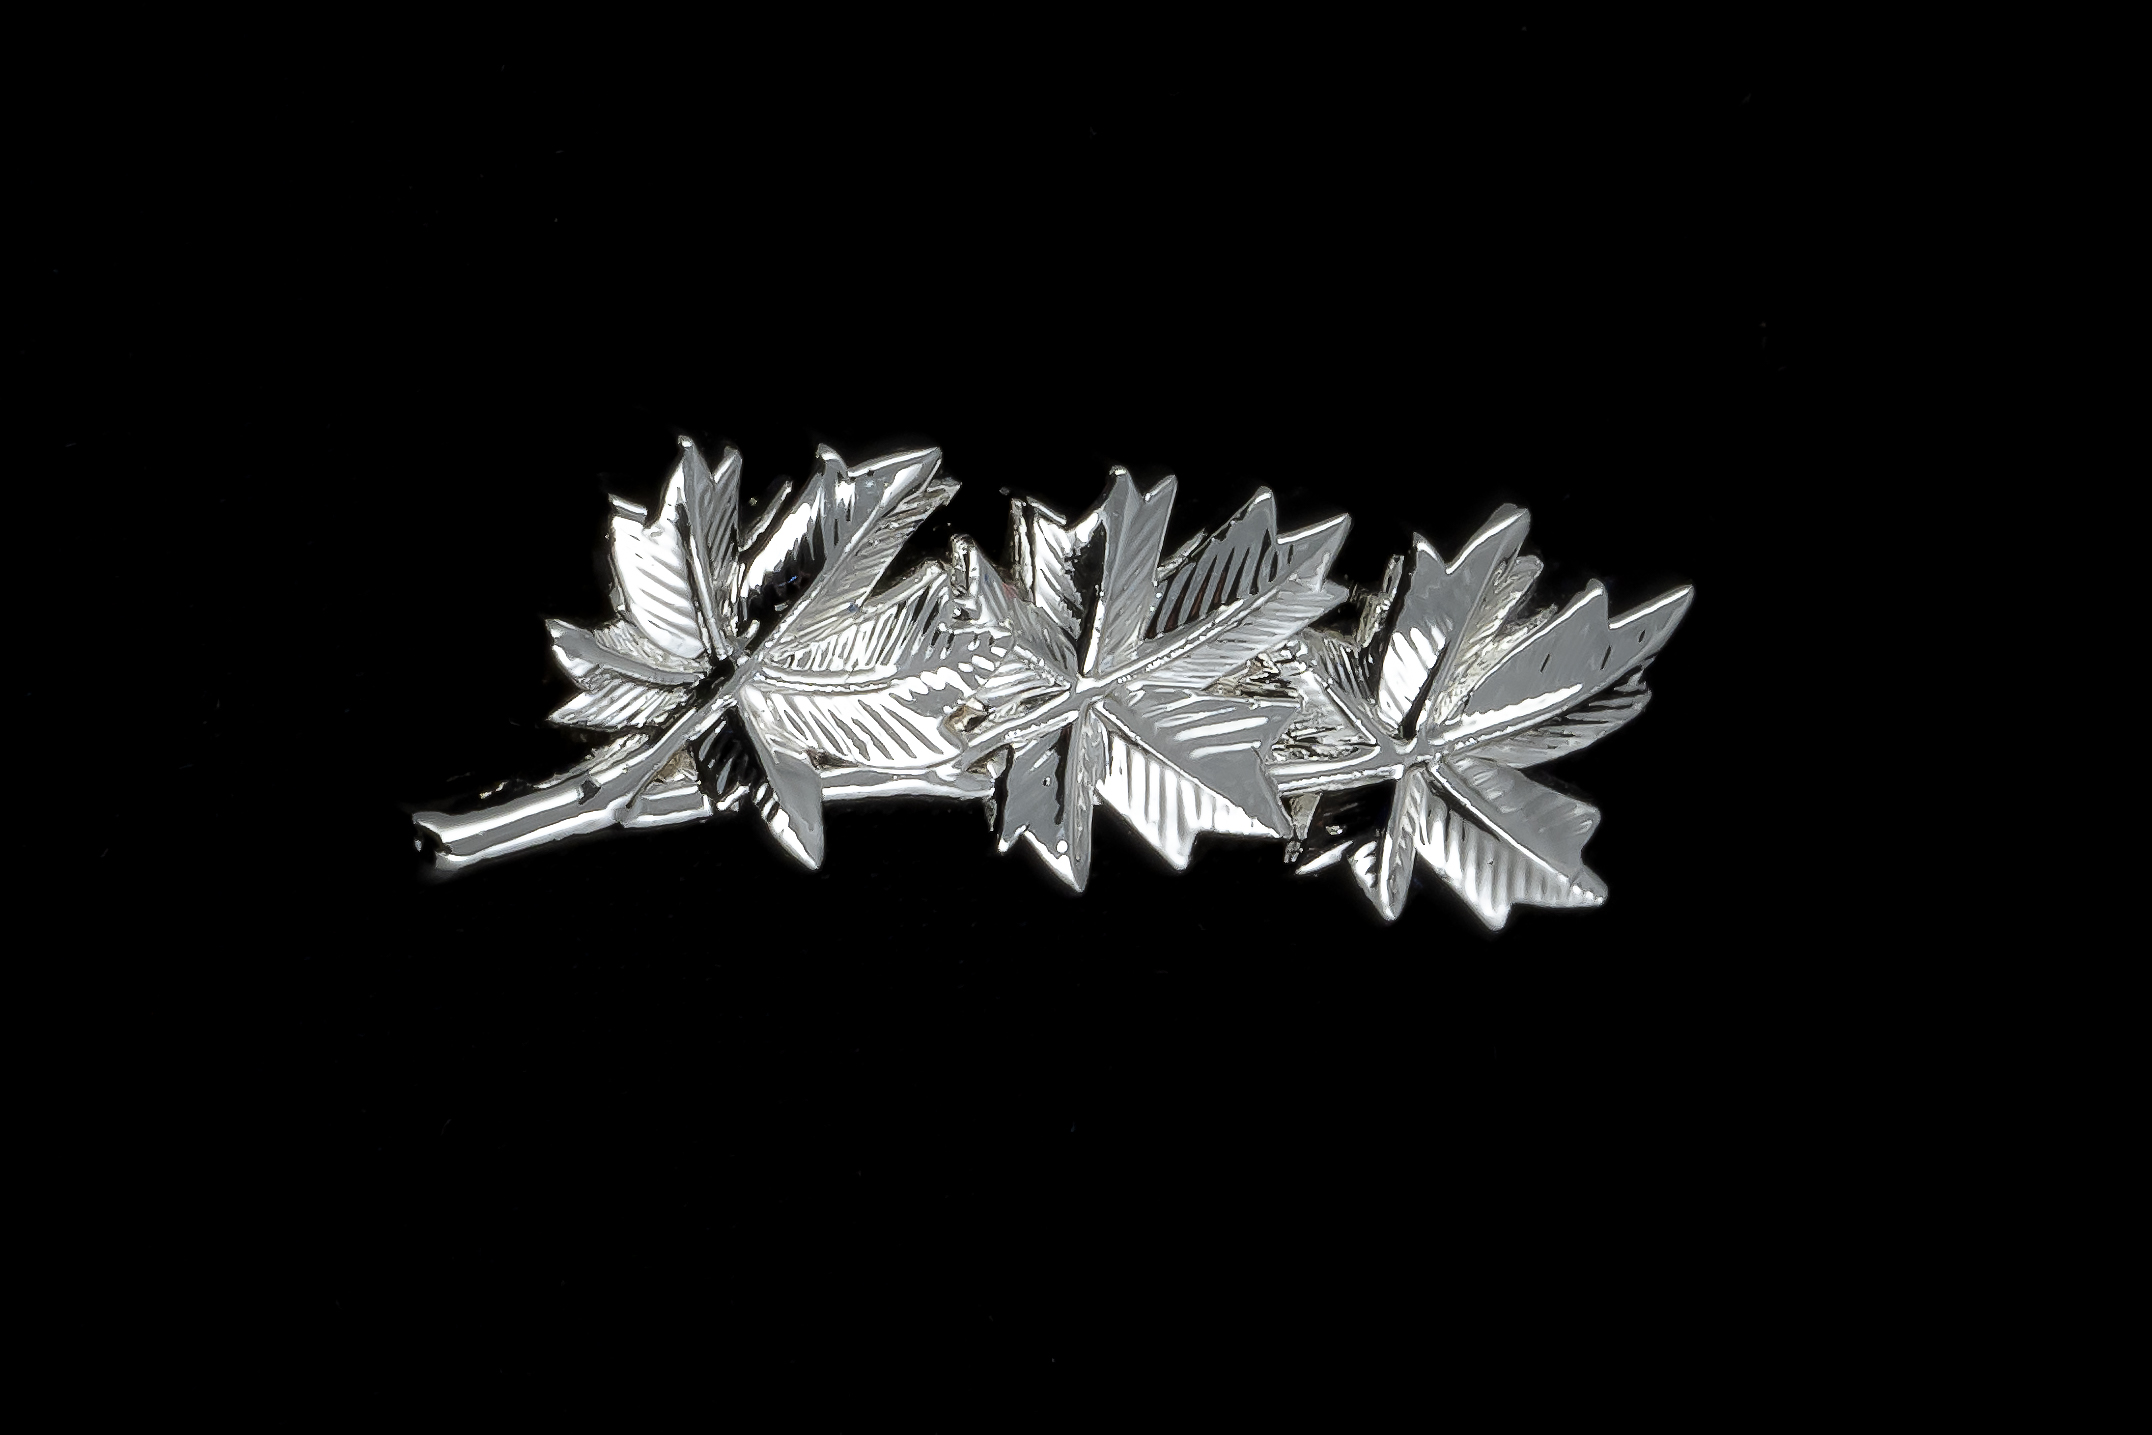 A silver pin on a black background. The pin consists of 3 maple leaves laying on top of the other.